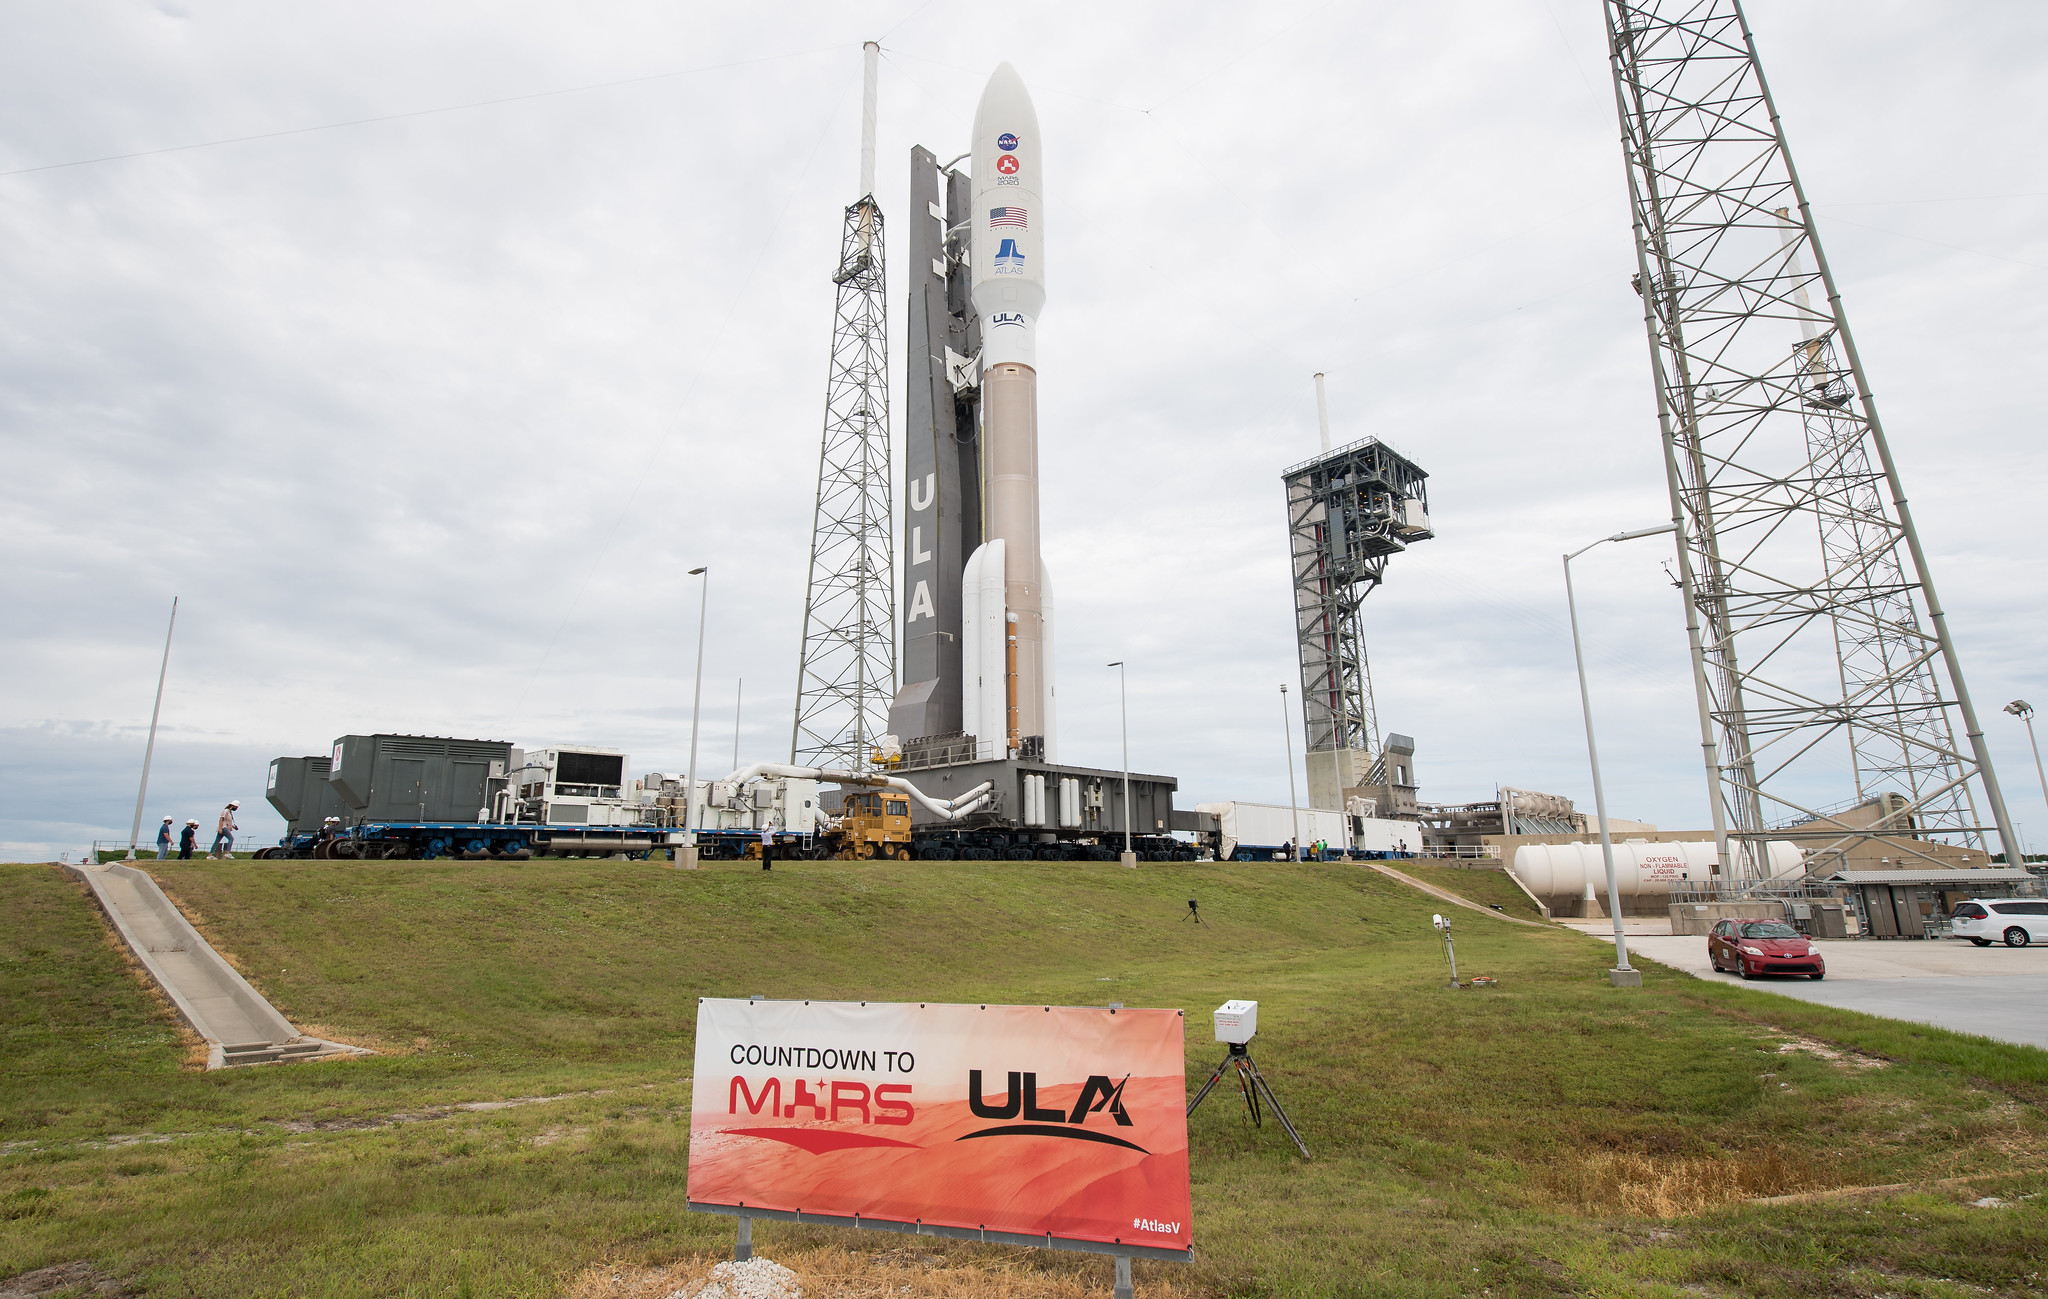 The United Launch Alliance Atlas V rocket carrying NASA's Mars 2020 Perseverance rover rolls out to its Space Launch Complex 41 launch pad at Cape Canaveral Air Force Station, Florida on July 28, 2020.